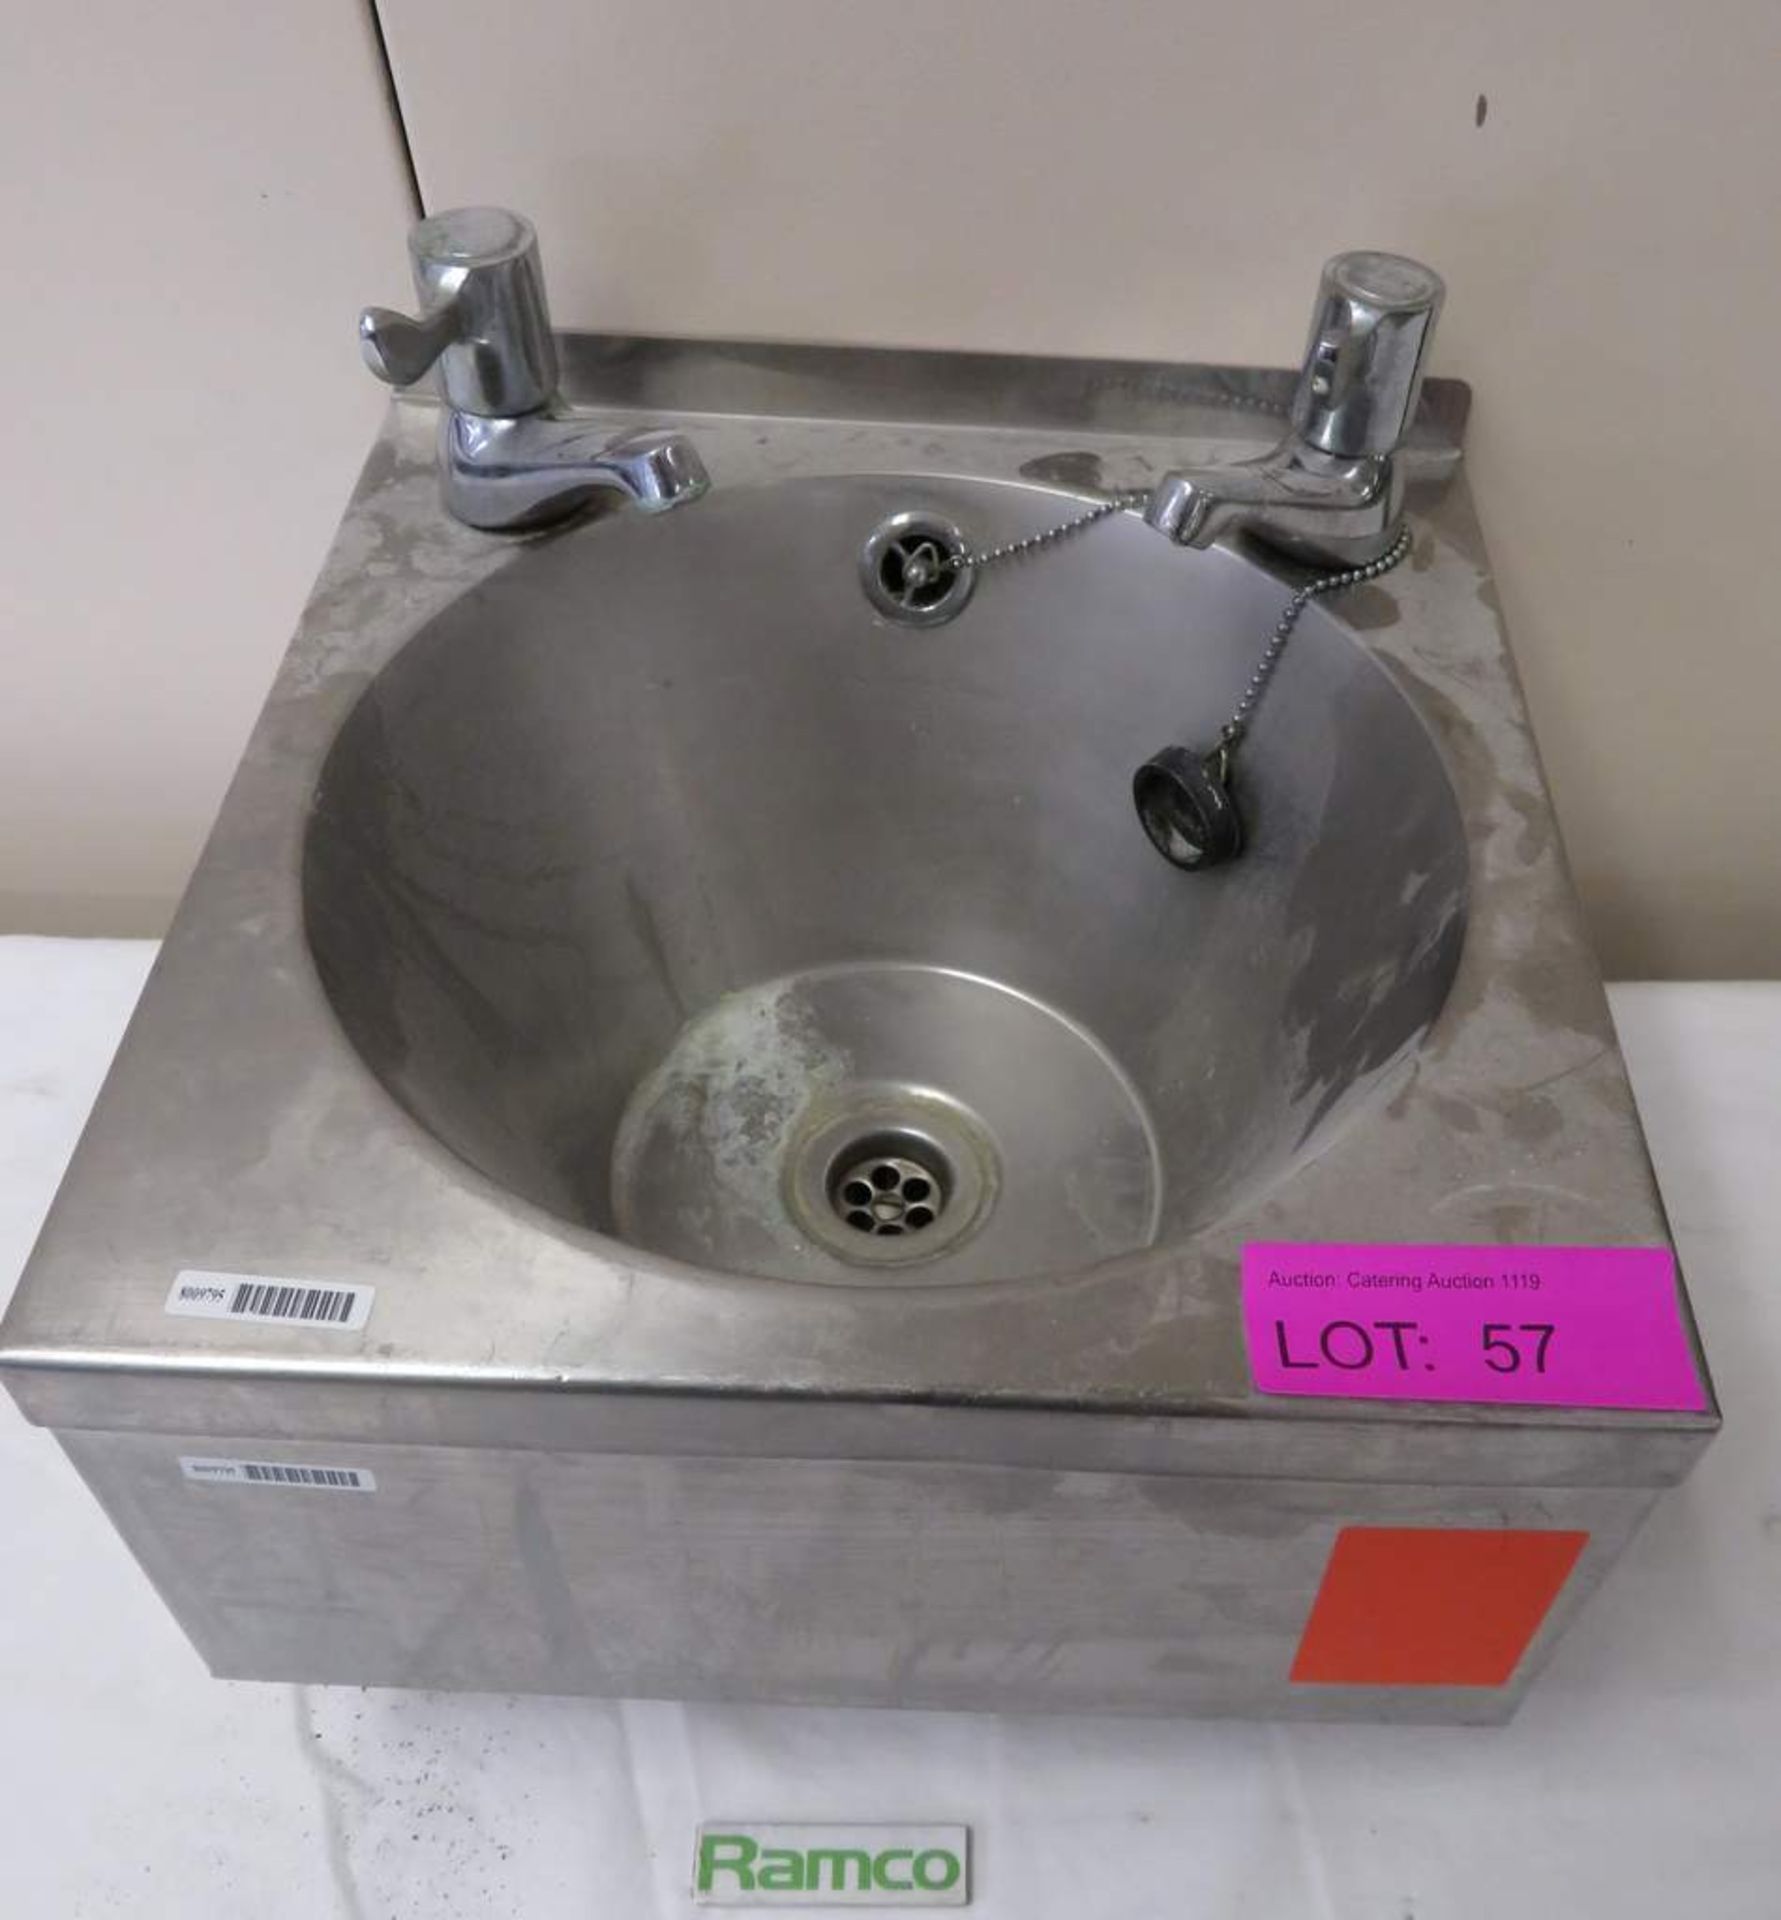 Stainless Steel Wall Mounted Sink. Dimensions: 340x350x230mm (LxWxH) - Image 2 of 4